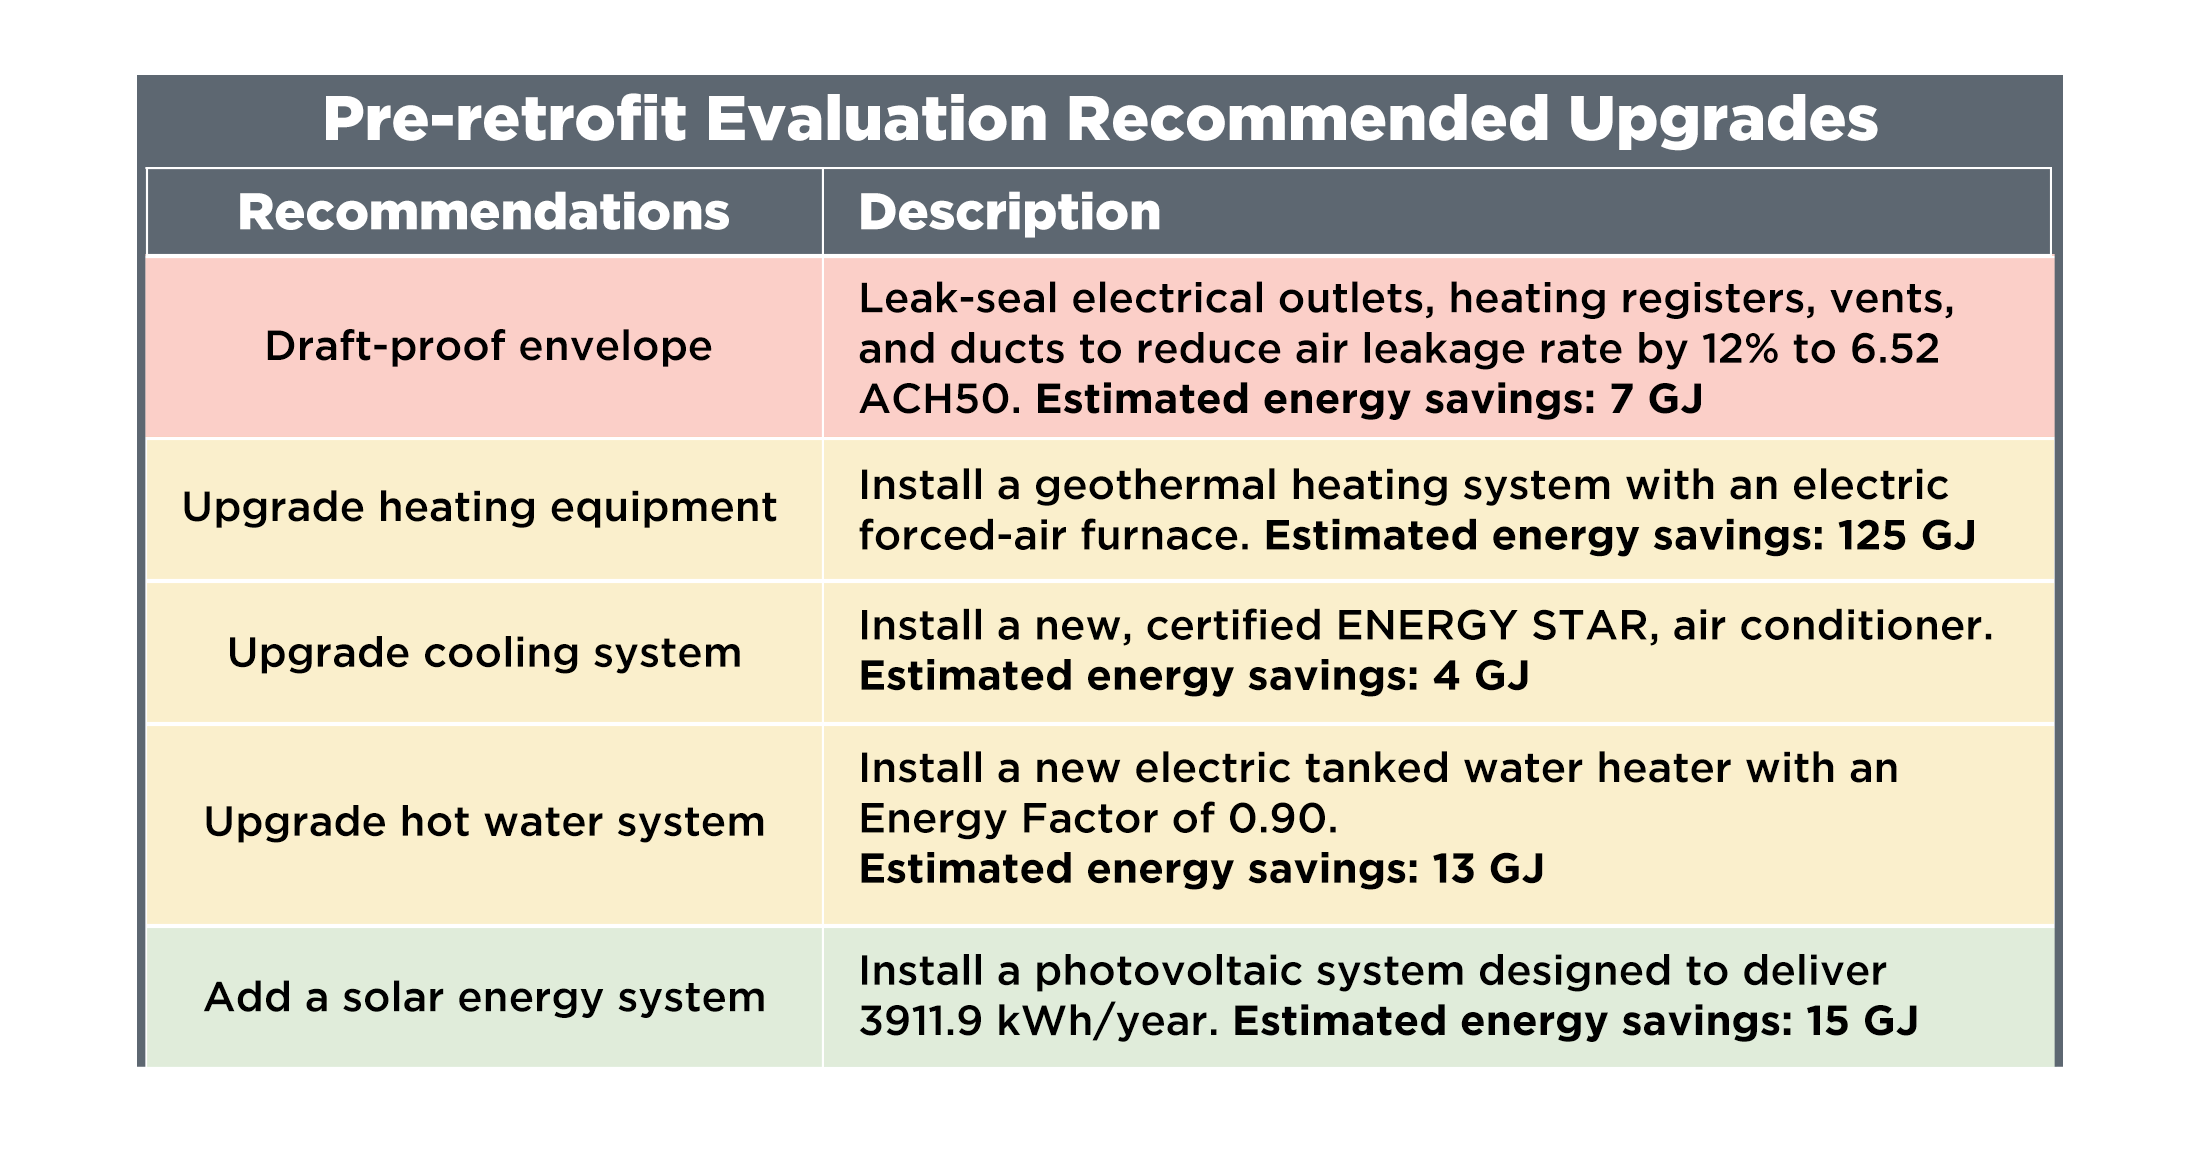 Table saying " Recommended Upgrades Recommendation Description Draft-proof envelope Seal up leaks in electrical outlets, heating registers, and ventilation ducts to reduces air leakage rate by 12% to 6.52 ACH50. Estimated energy savings: 7 GJ Upgrade heating equipment Install a geothermal heating system with an electric forced-air furnace. Estimated energy savings: 125 GJ Upgrade cooling system Install a new certified ENERGY STAR air conditioner. Estimated energy savings: 4 GJ Upgrade hot water system Install a new electric tanked water heater with an Energy Factor of 0.90. Estimated energy savings: 13 GJ Add a solar energy system Install a photovoltaic system designed to deliver 3911.9 kWh/year. Estimated energy savings: 15 GJ